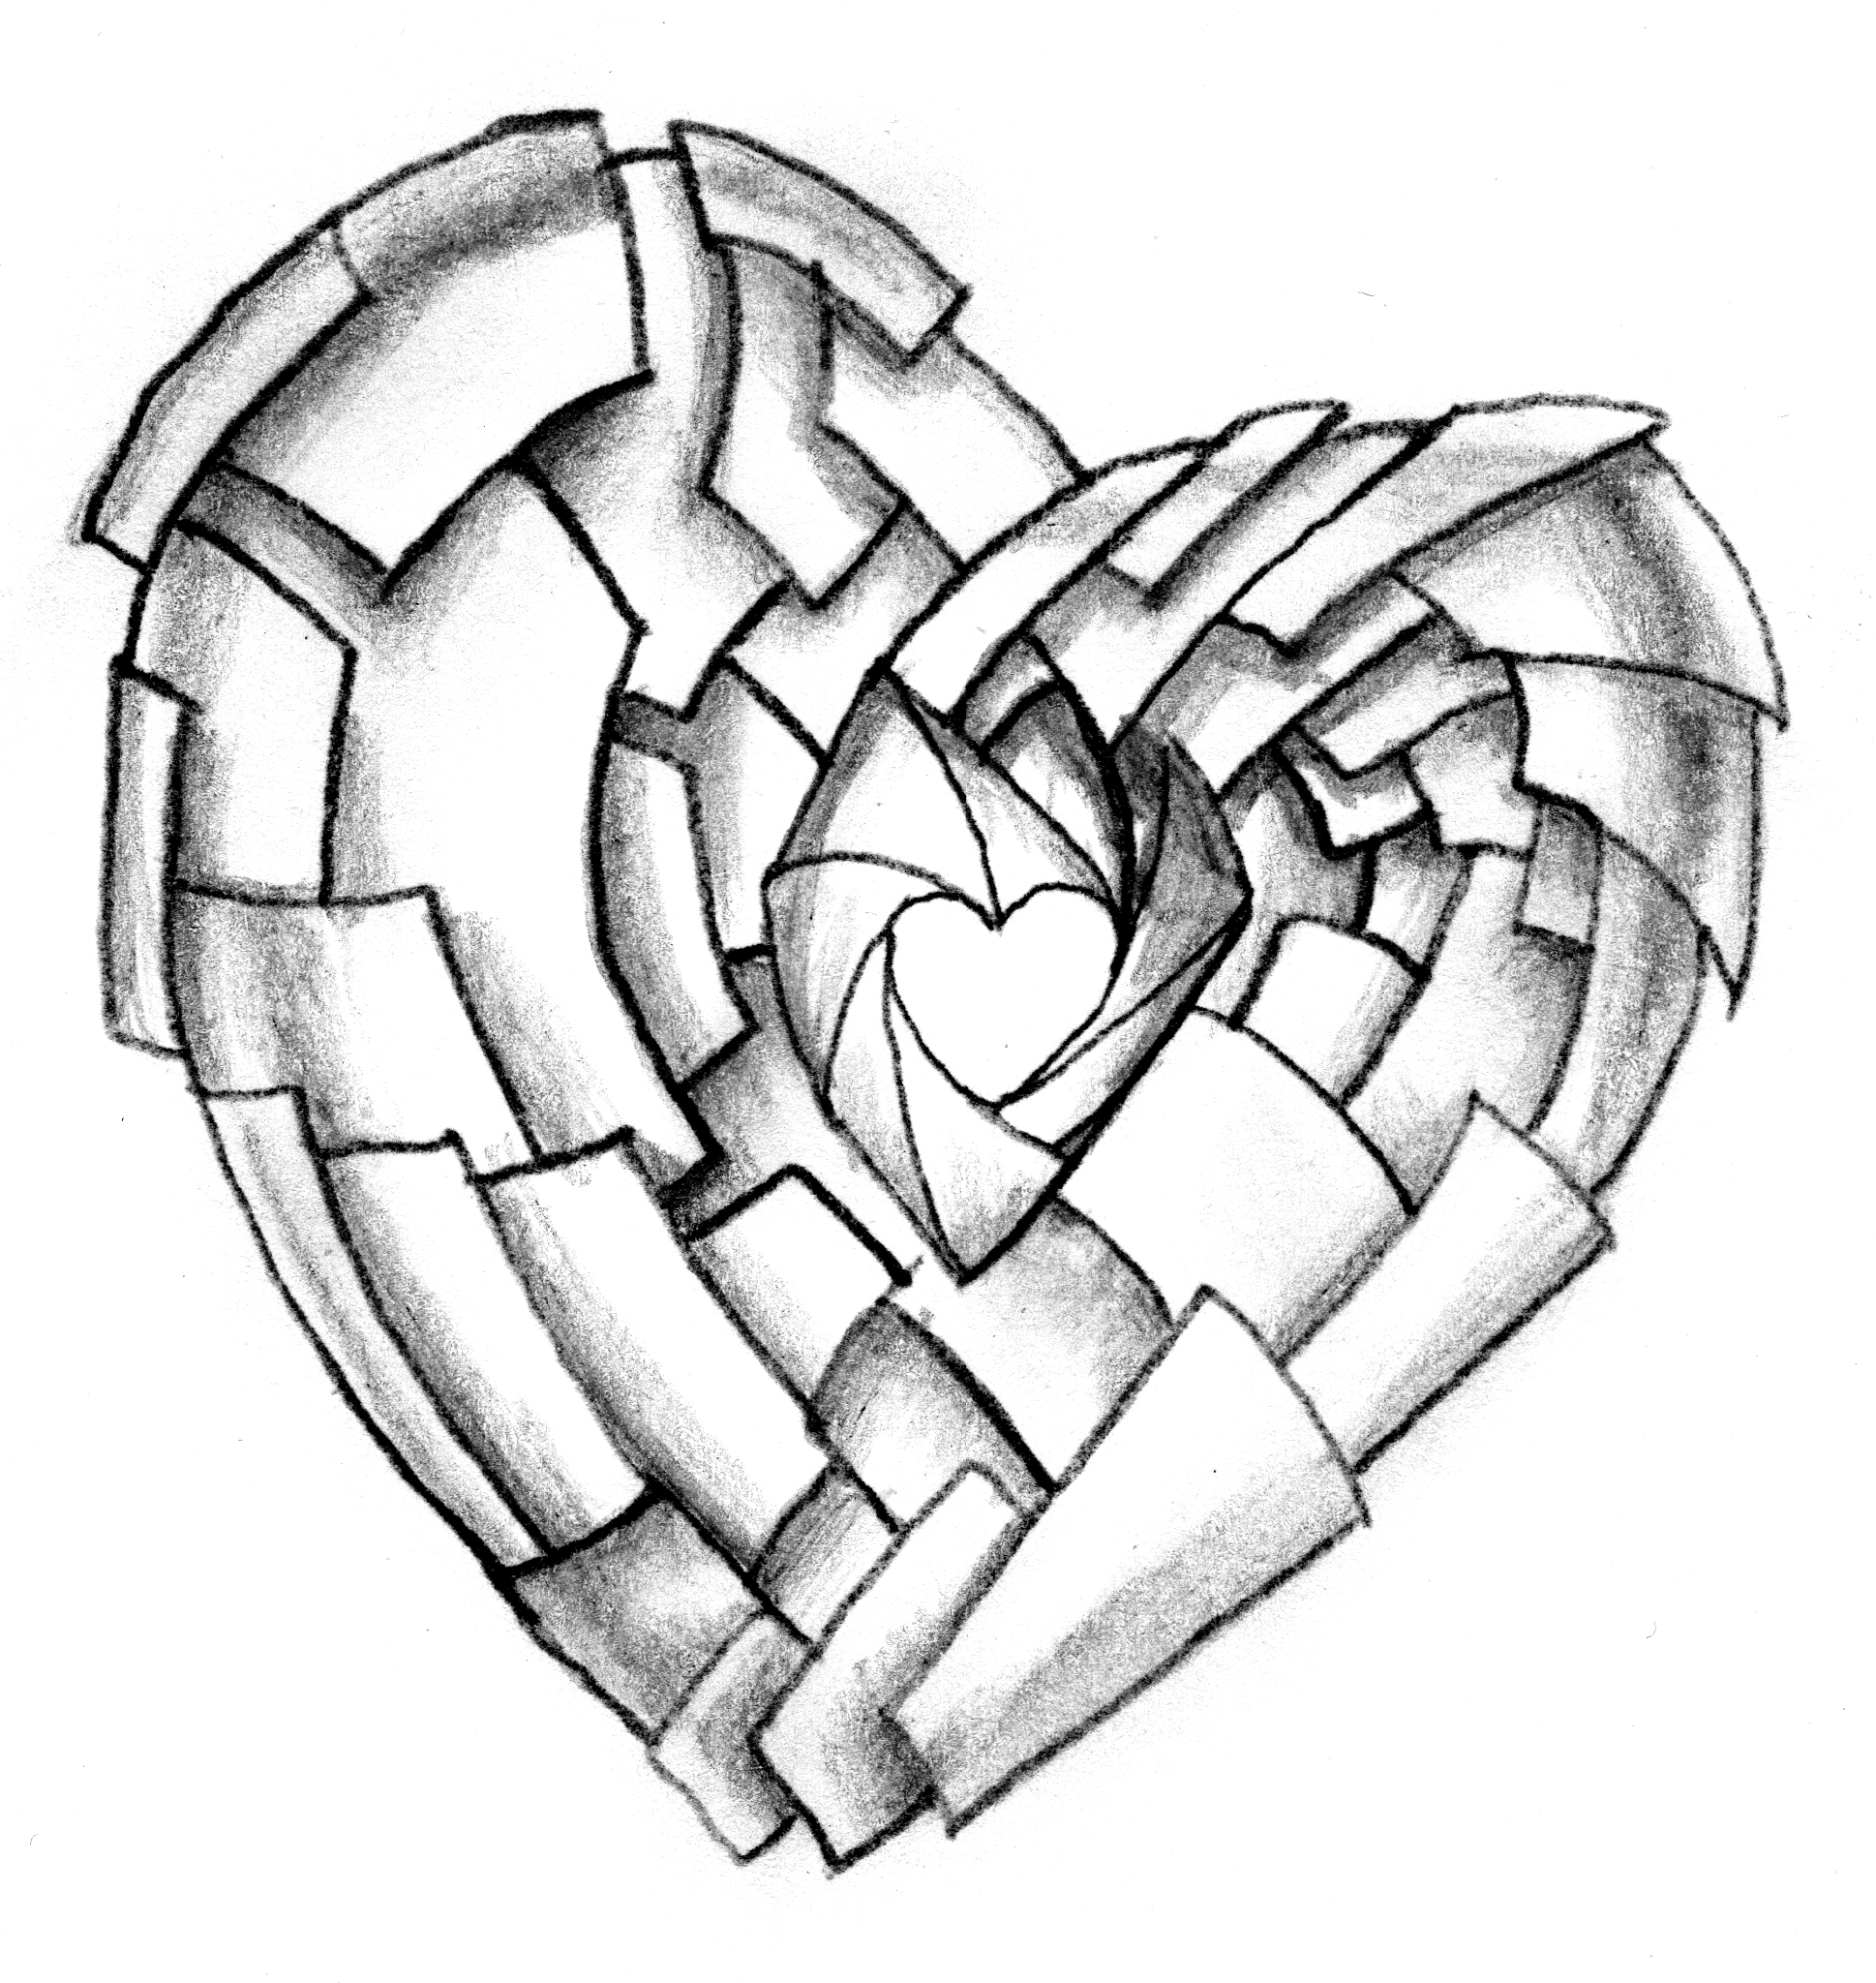 Free Love Heart Drawings, Download Free Love Heart Drawings png images